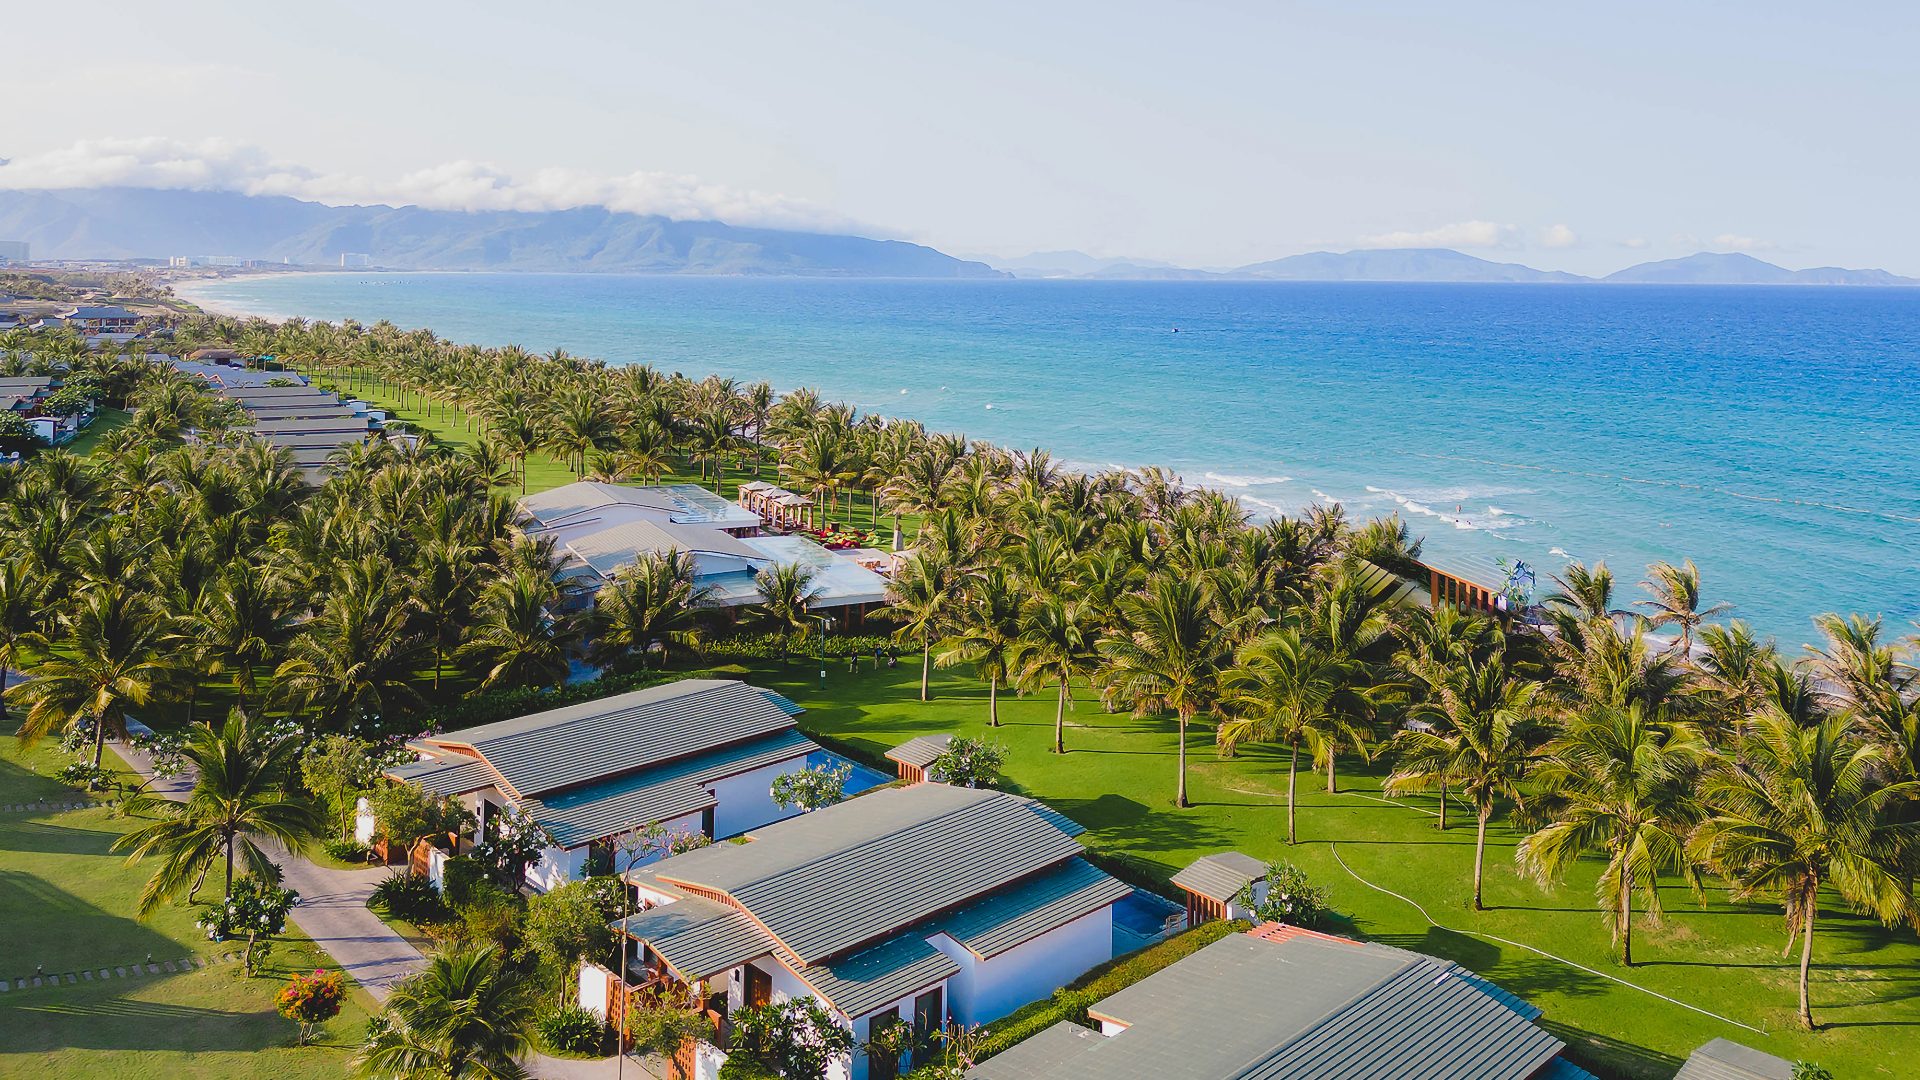 Enjoy the biggest Member Private Sale for ALL members at Mövenpick Resort Cam Ranh landscape with blue beach and the greenest tropical lawn.